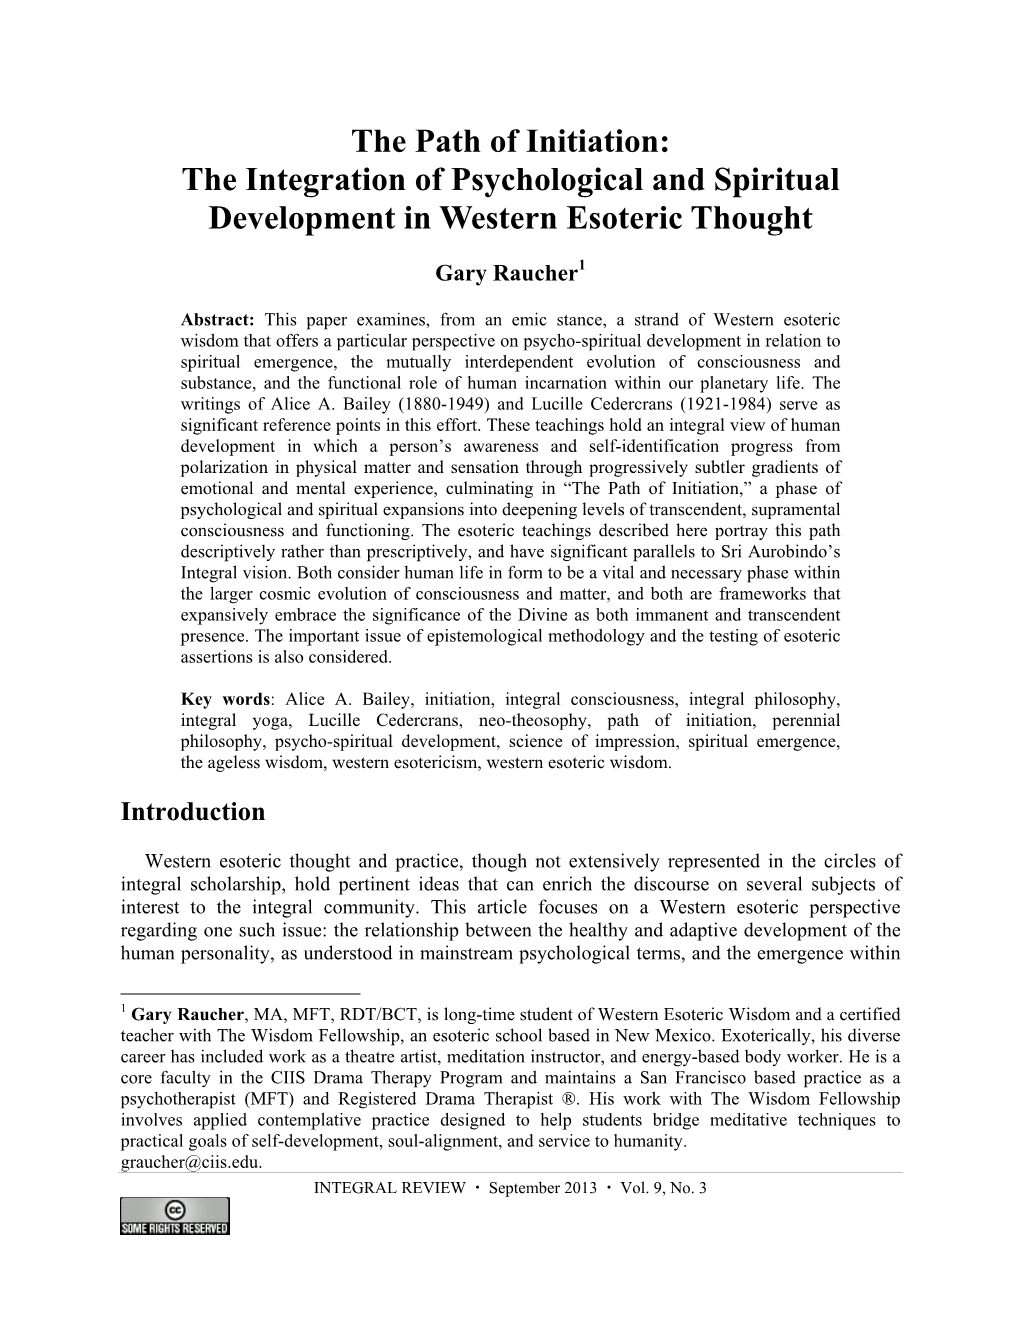 The Path of Initiation: the Integration of Psychological and Spiritual Development in Western Esoteric Thought